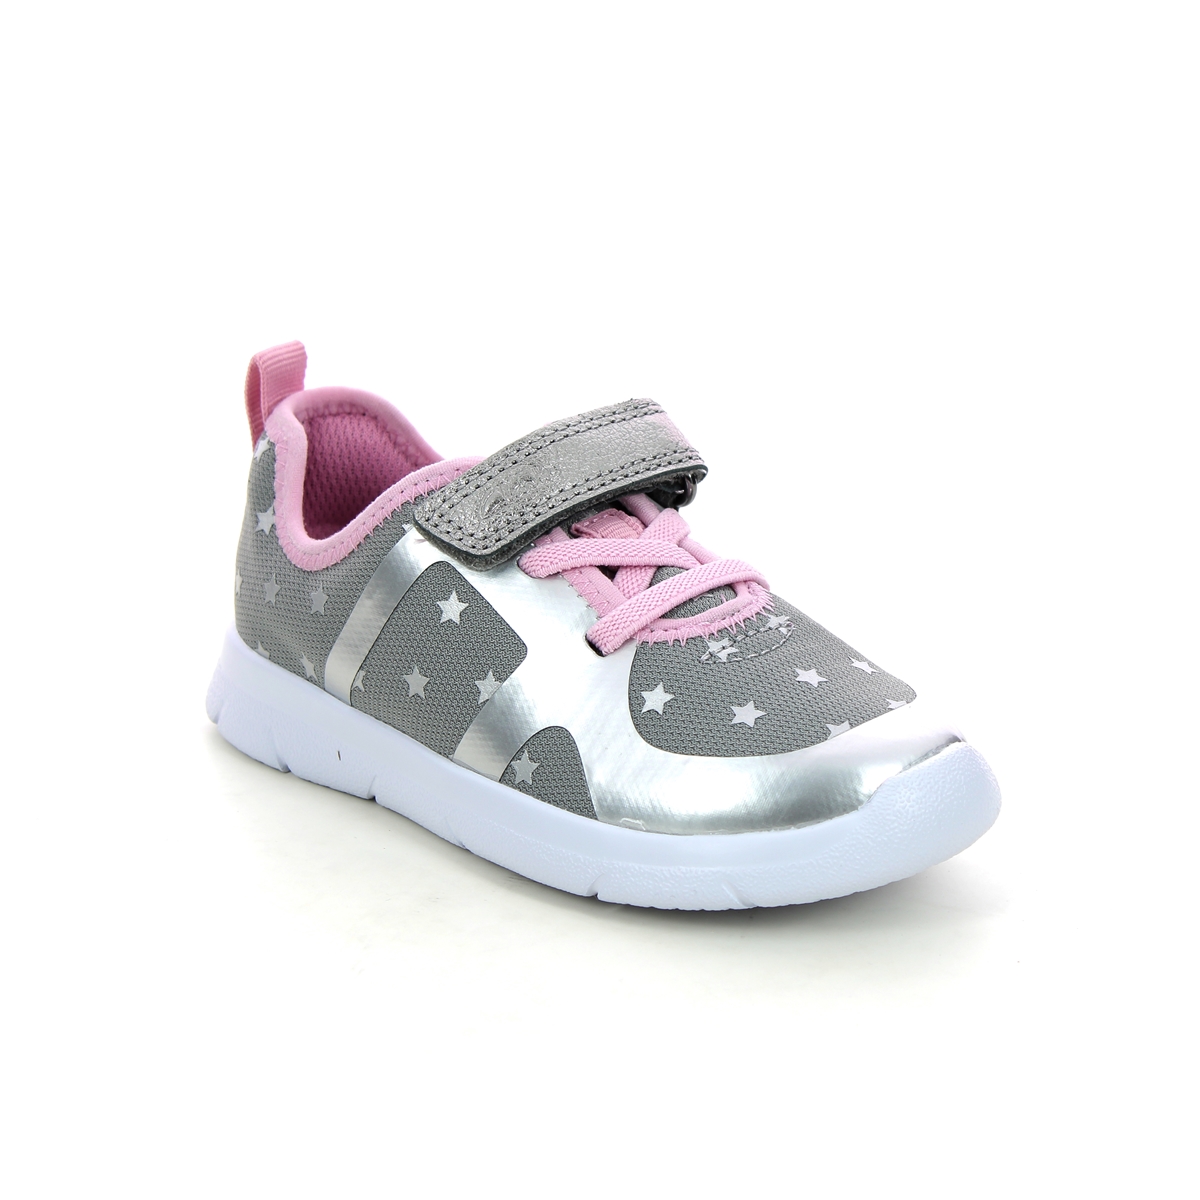 Clarks Ath Flux T Pewter Kids toddler girls trainers 5155-36F in a Plain Man-made in Size 6.5